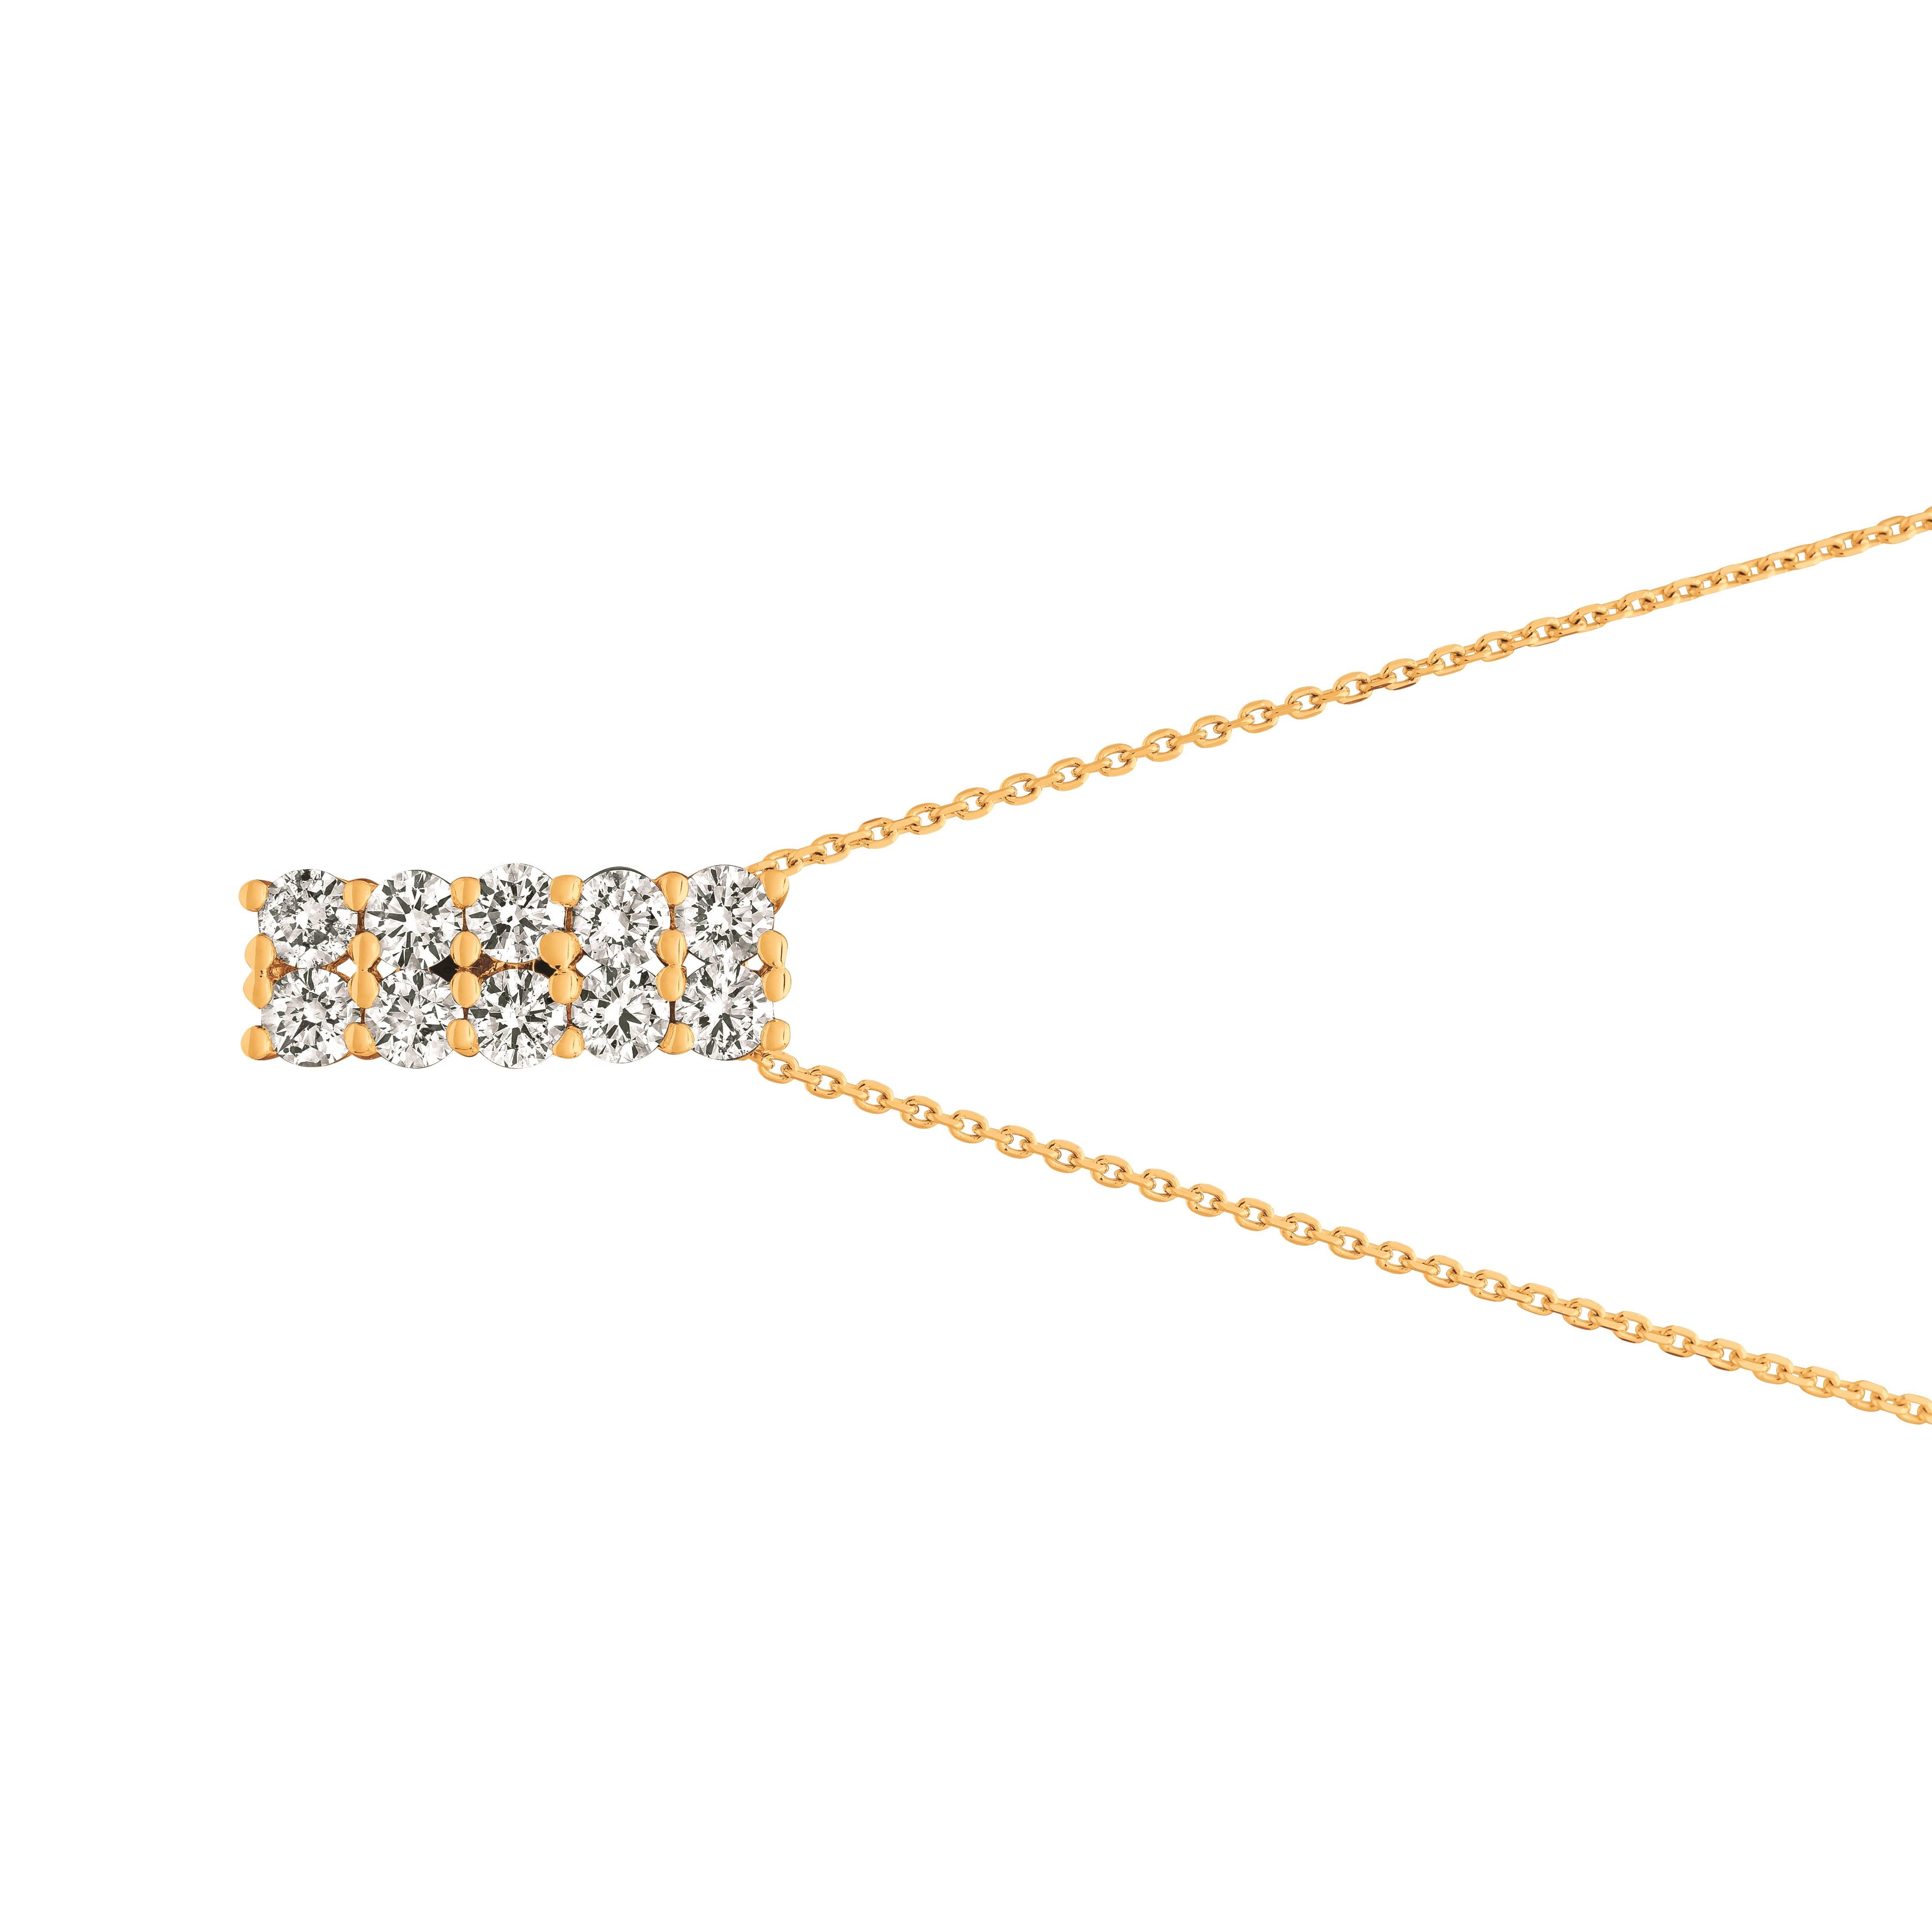 1.55 Carat Natural Diamond 2 Rows Necklace 14K Yellow Gold G SI 18 inches chain

100% Natural Diamonds, Not Enhanced in any way Round Cut Diamond Necklace
1.55CT
G-H
SI
14K Yellow Gold, Prong style , 3.7 grams
11/16 inch in height, 1/4 inch in